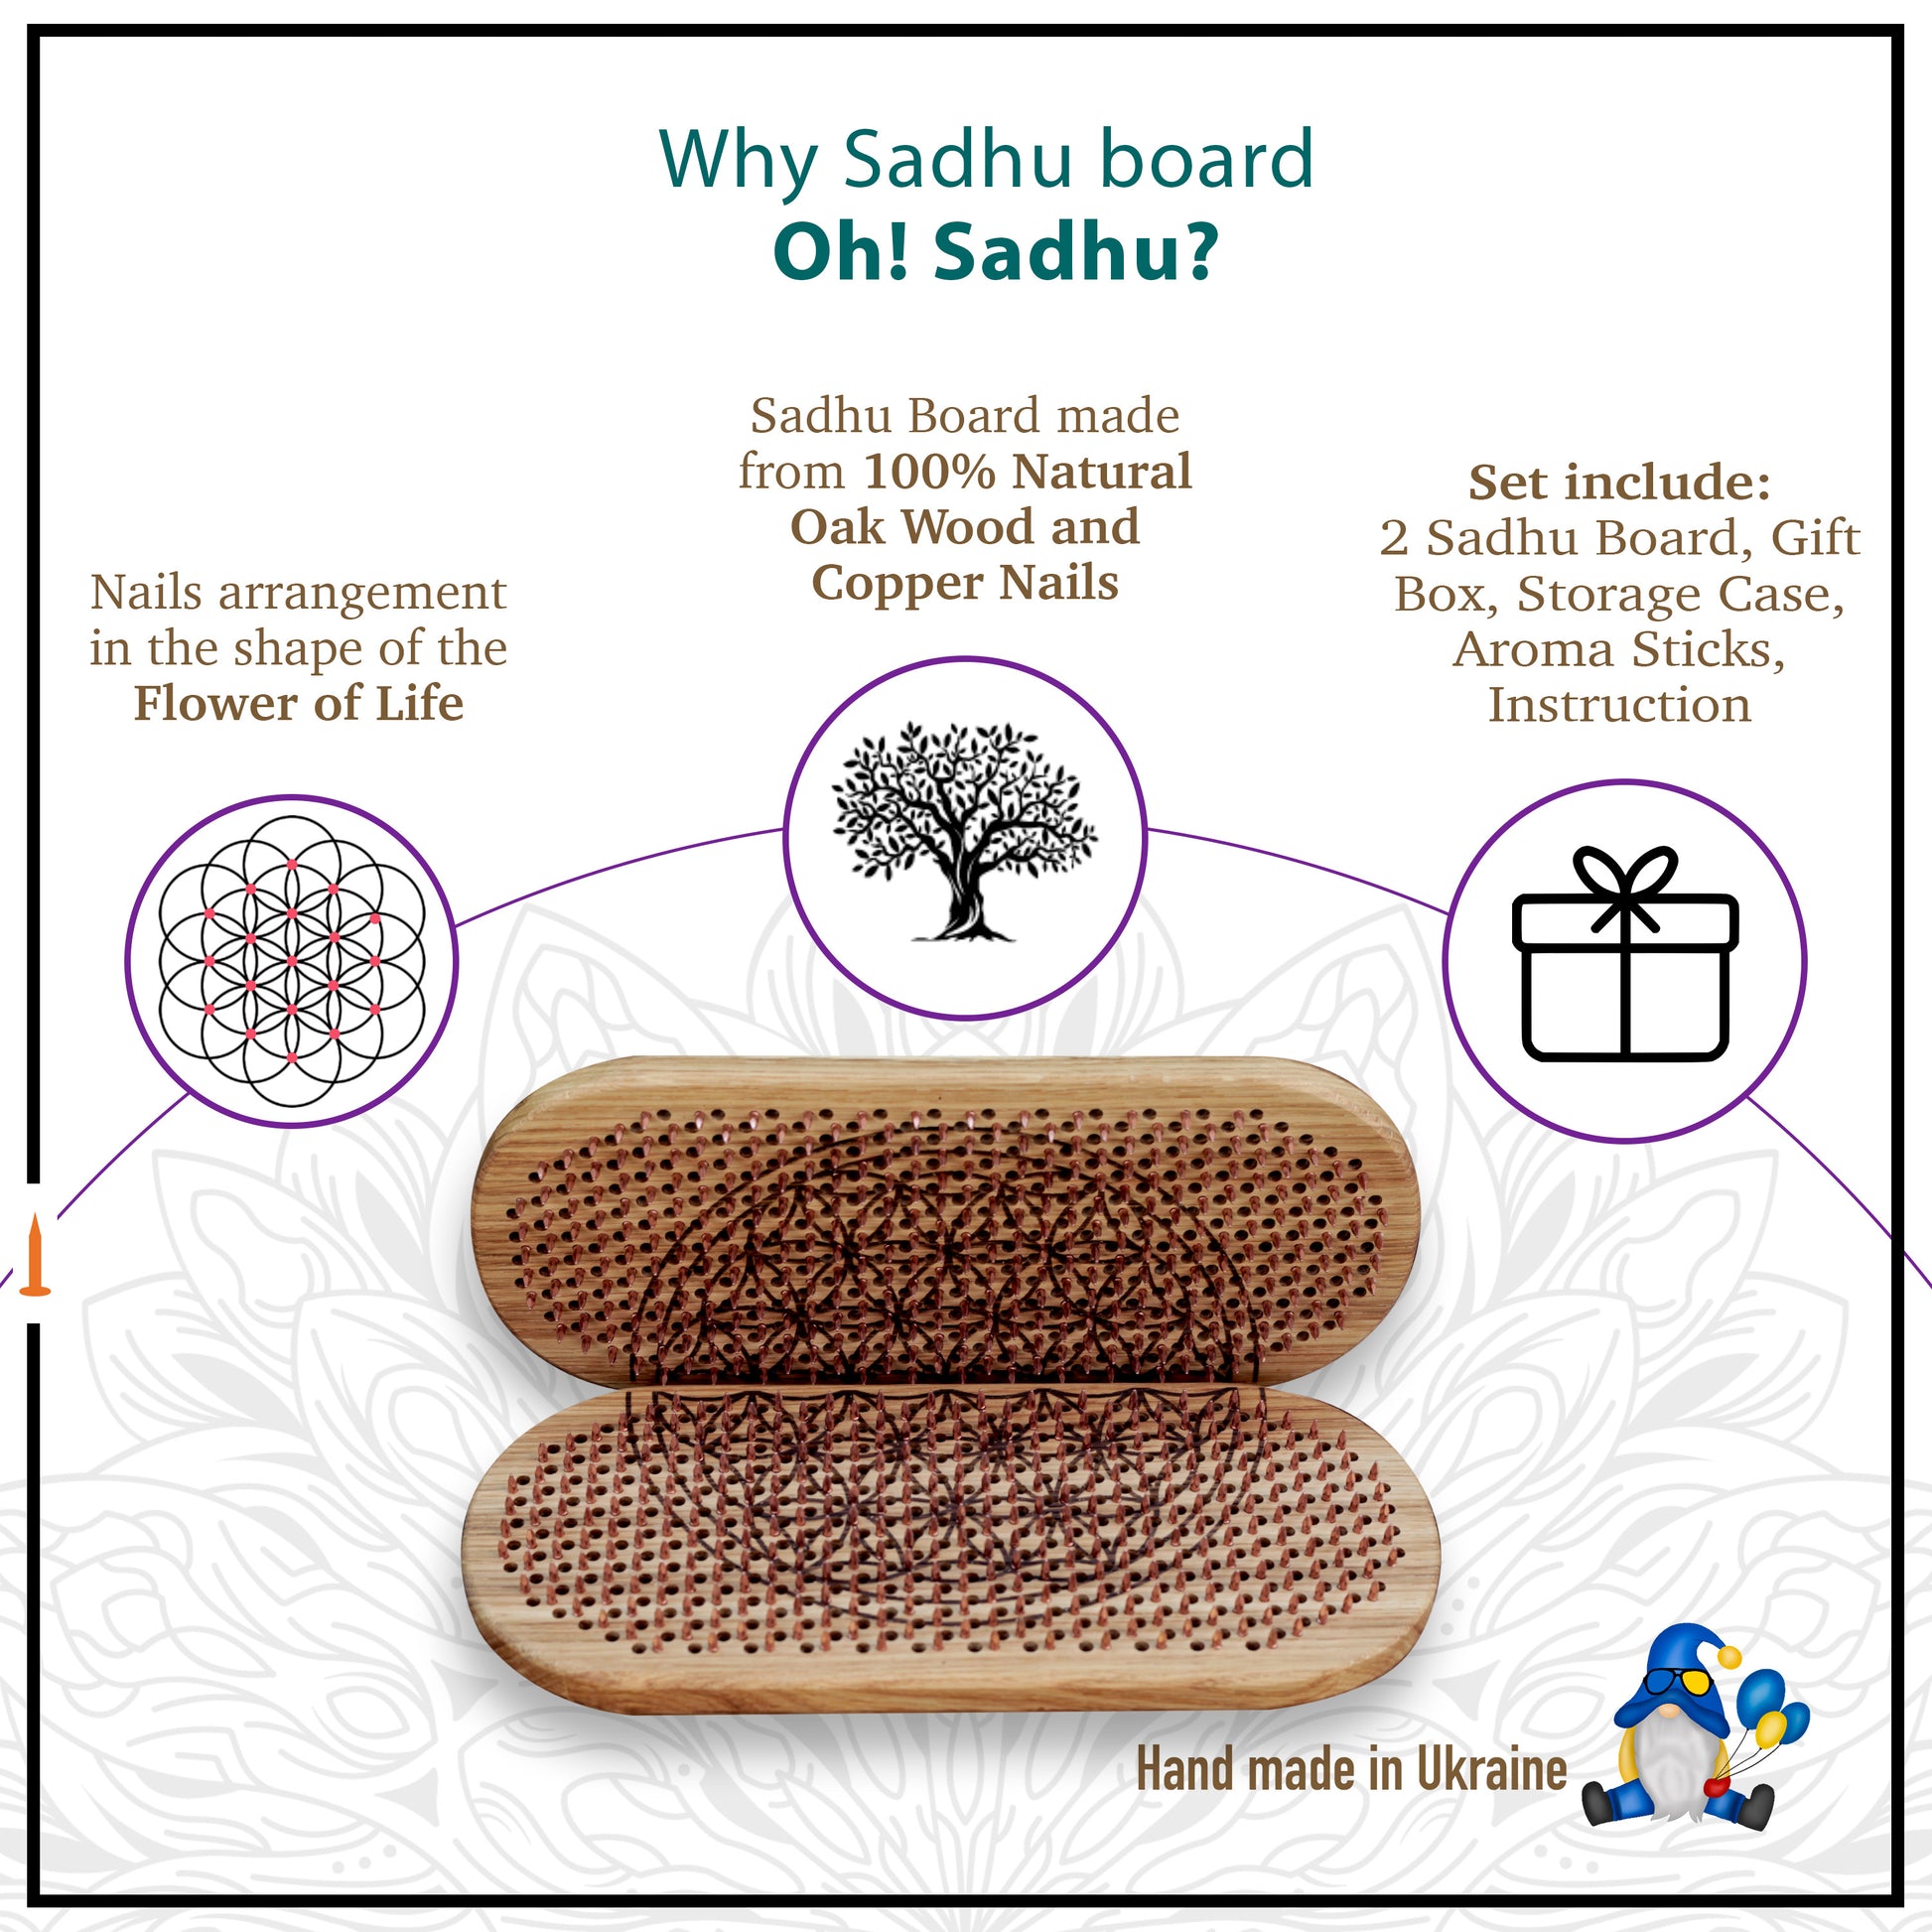 Advantages of Oh! Sadhu wooden sadhu board with copper nails and engraving chakras and flower of life